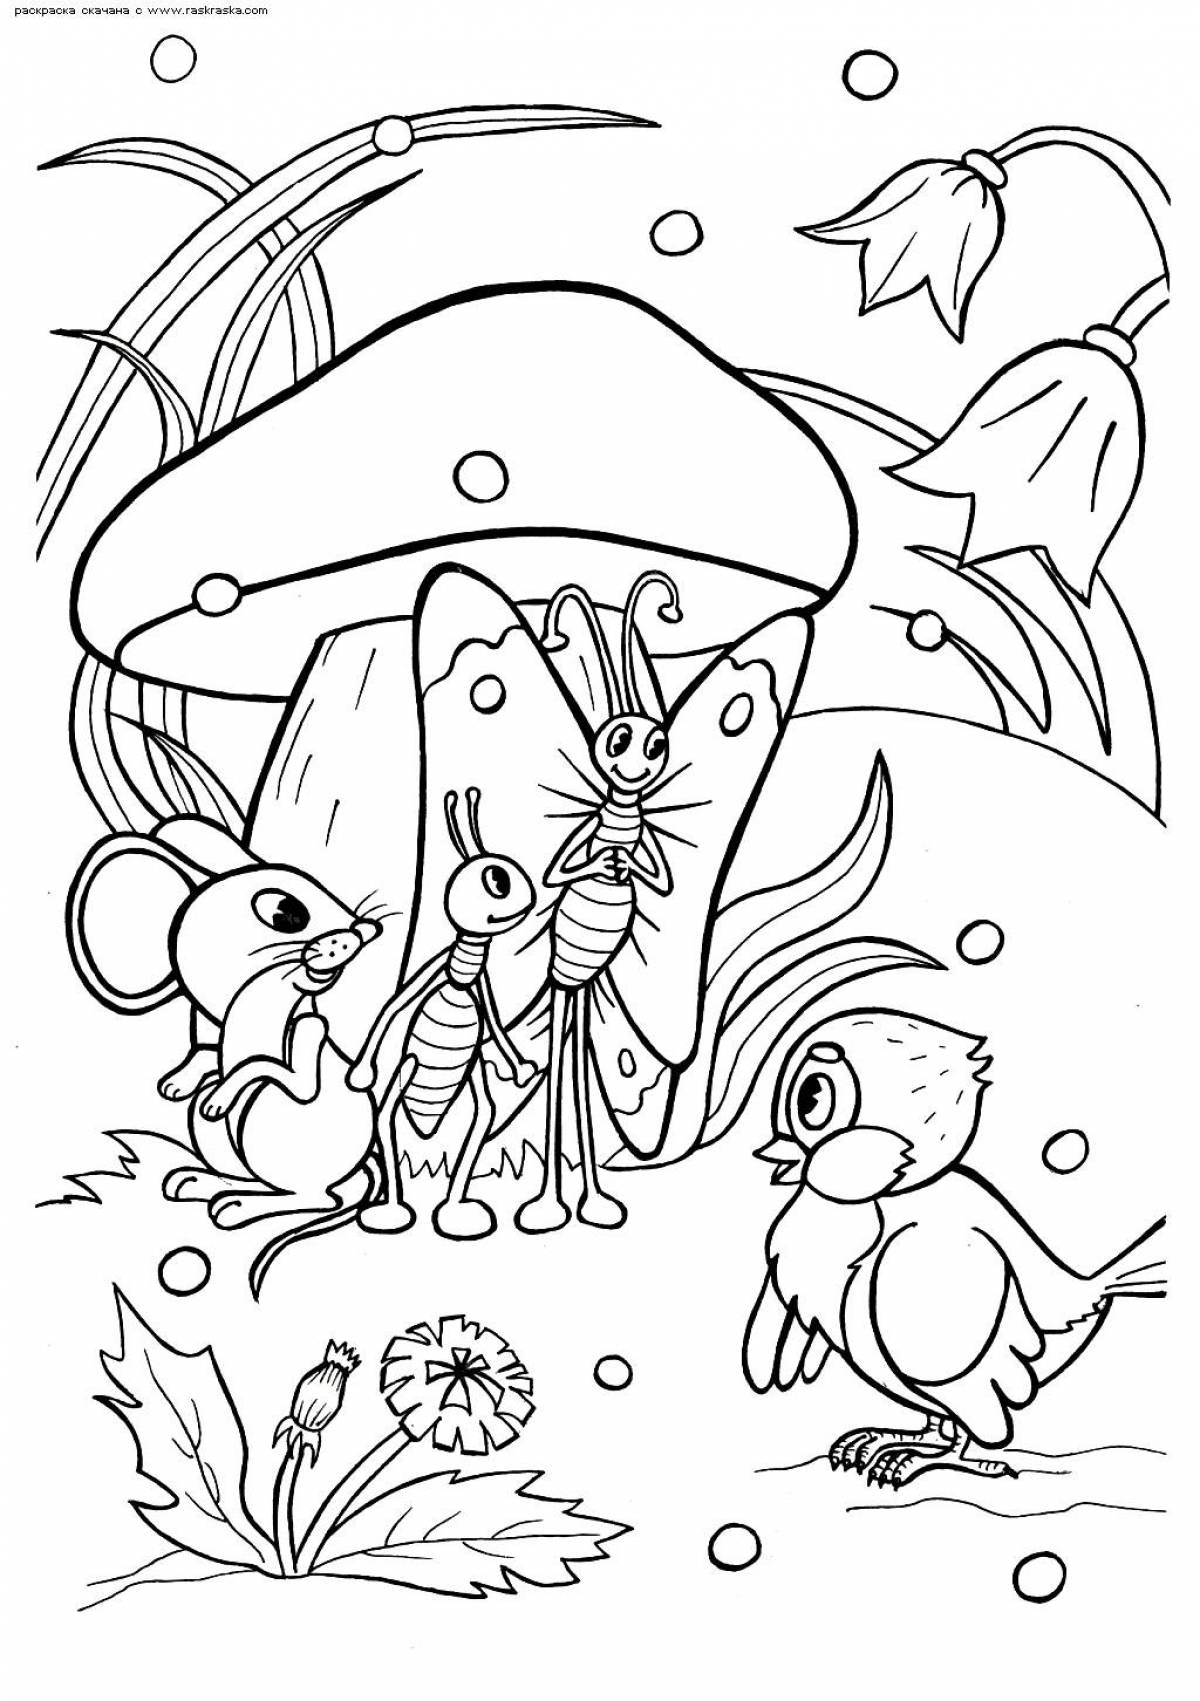 Tempting fairy tale coloring pages